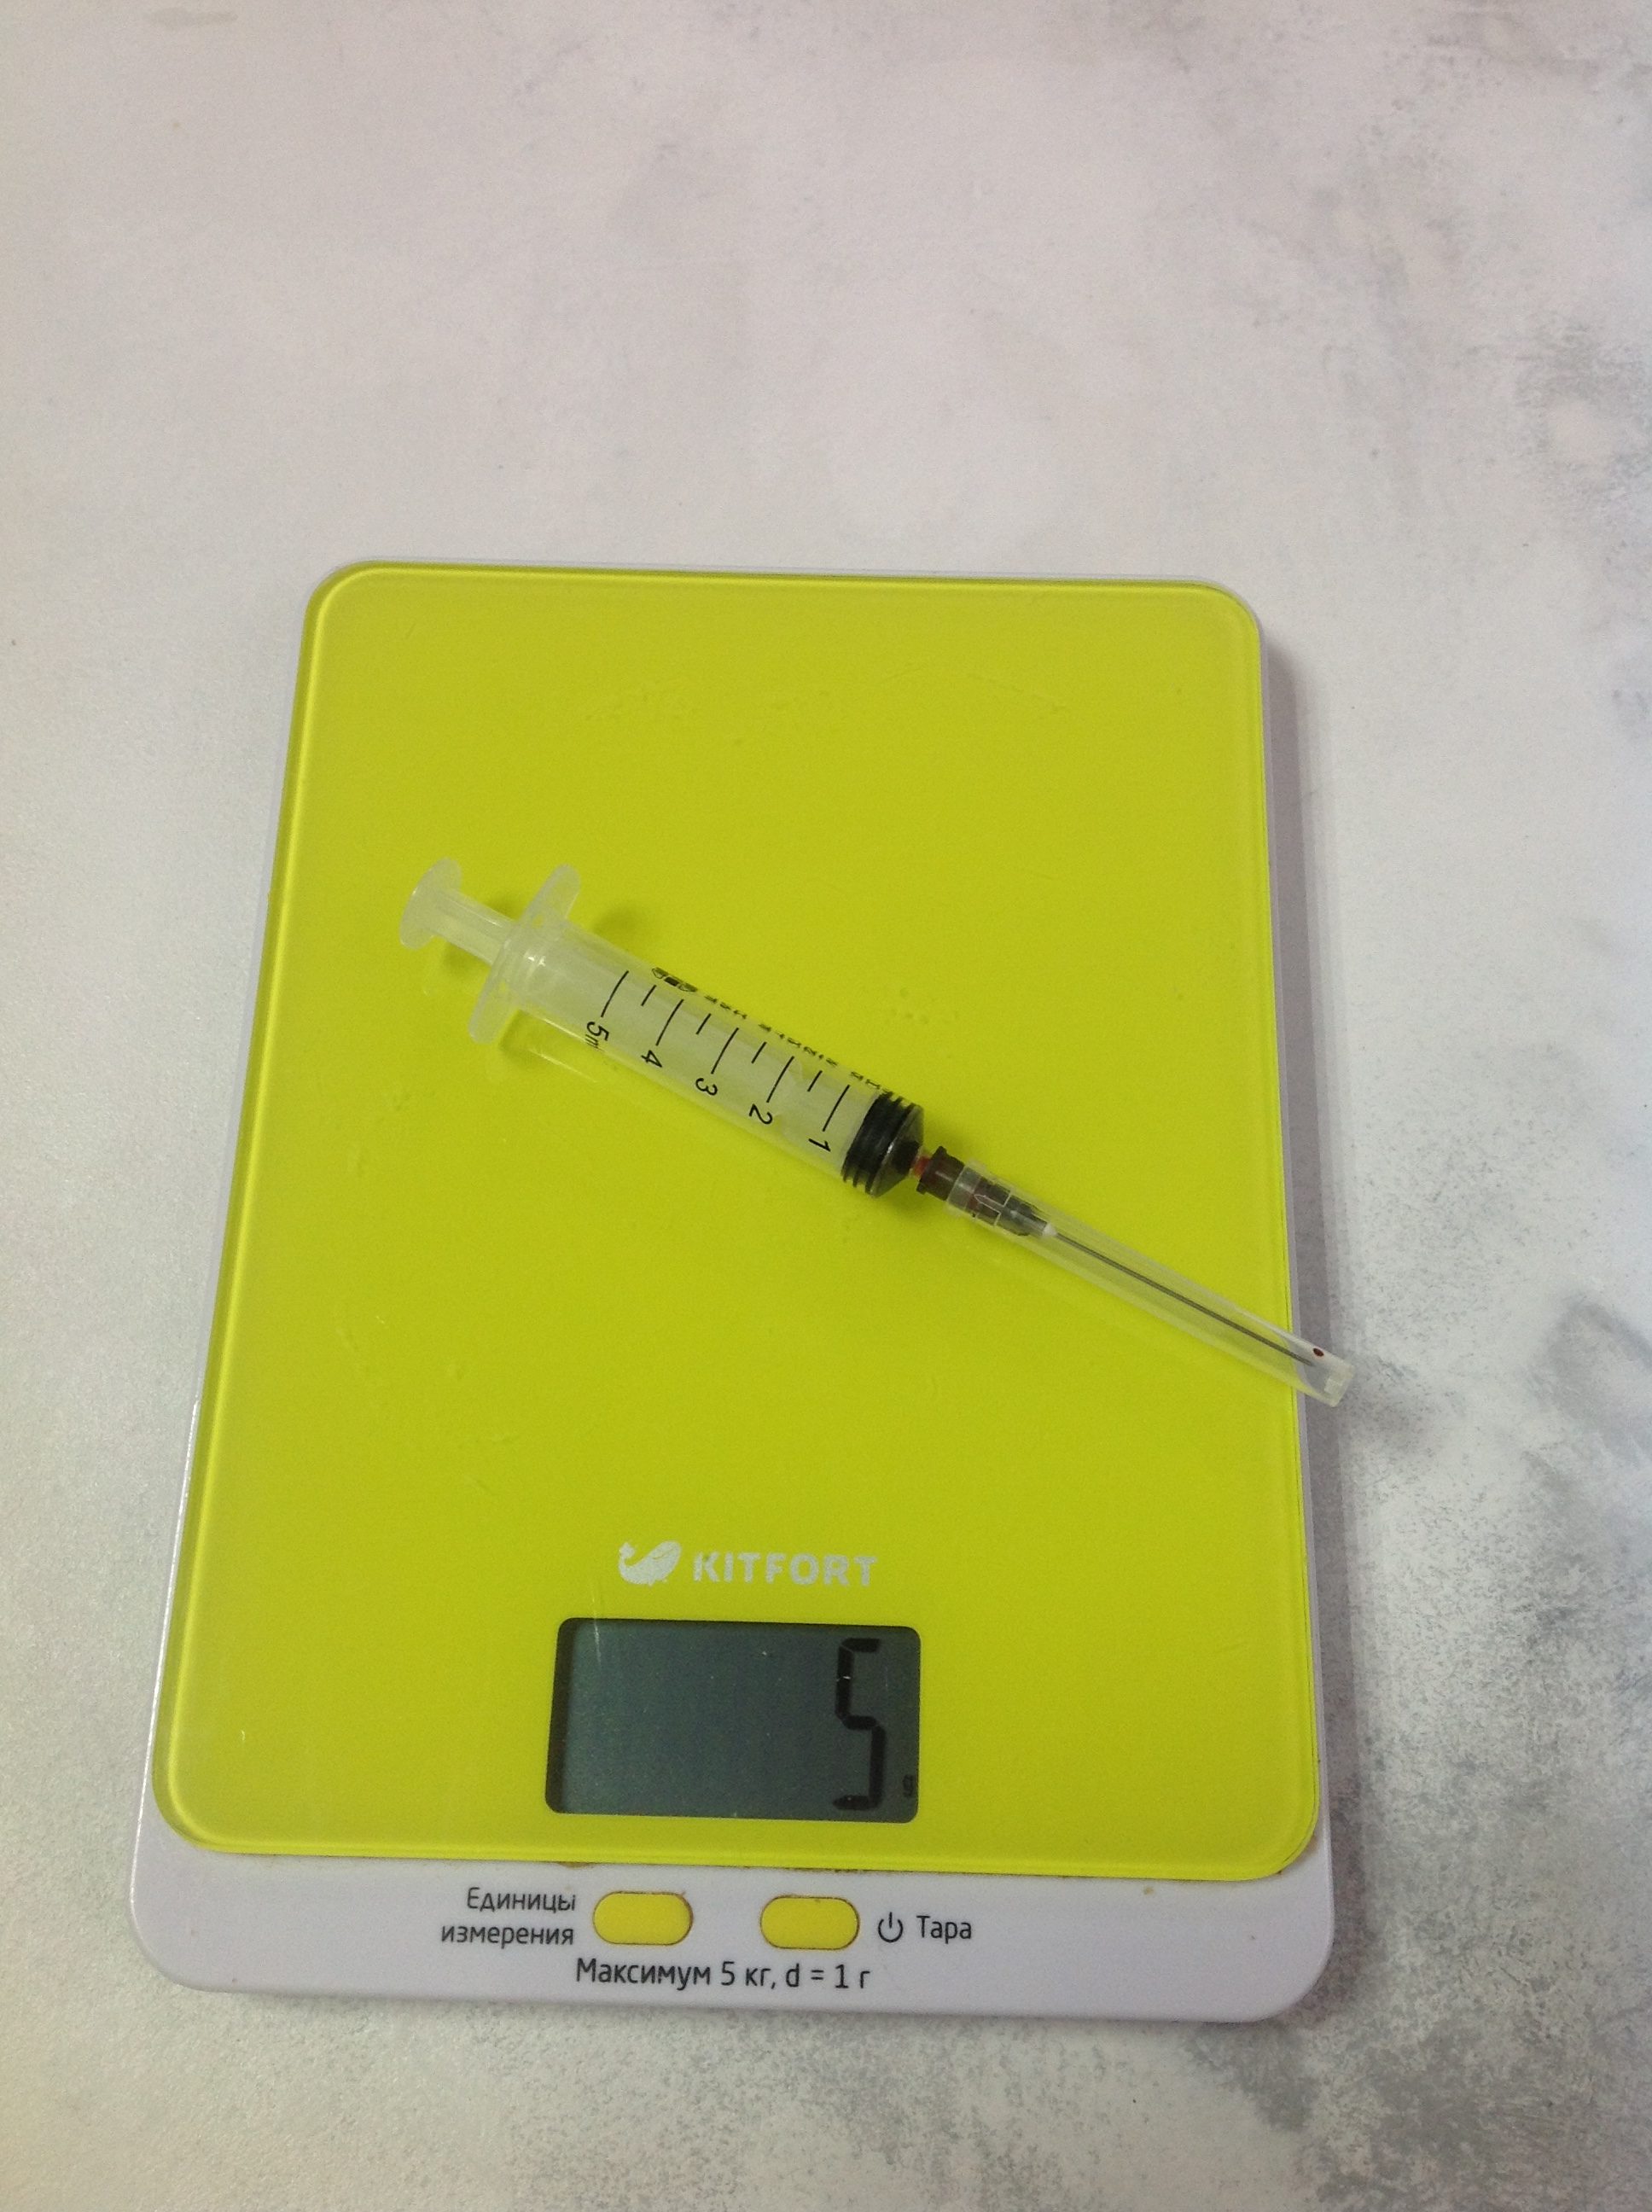 How much does a 5cc syringe weigh?